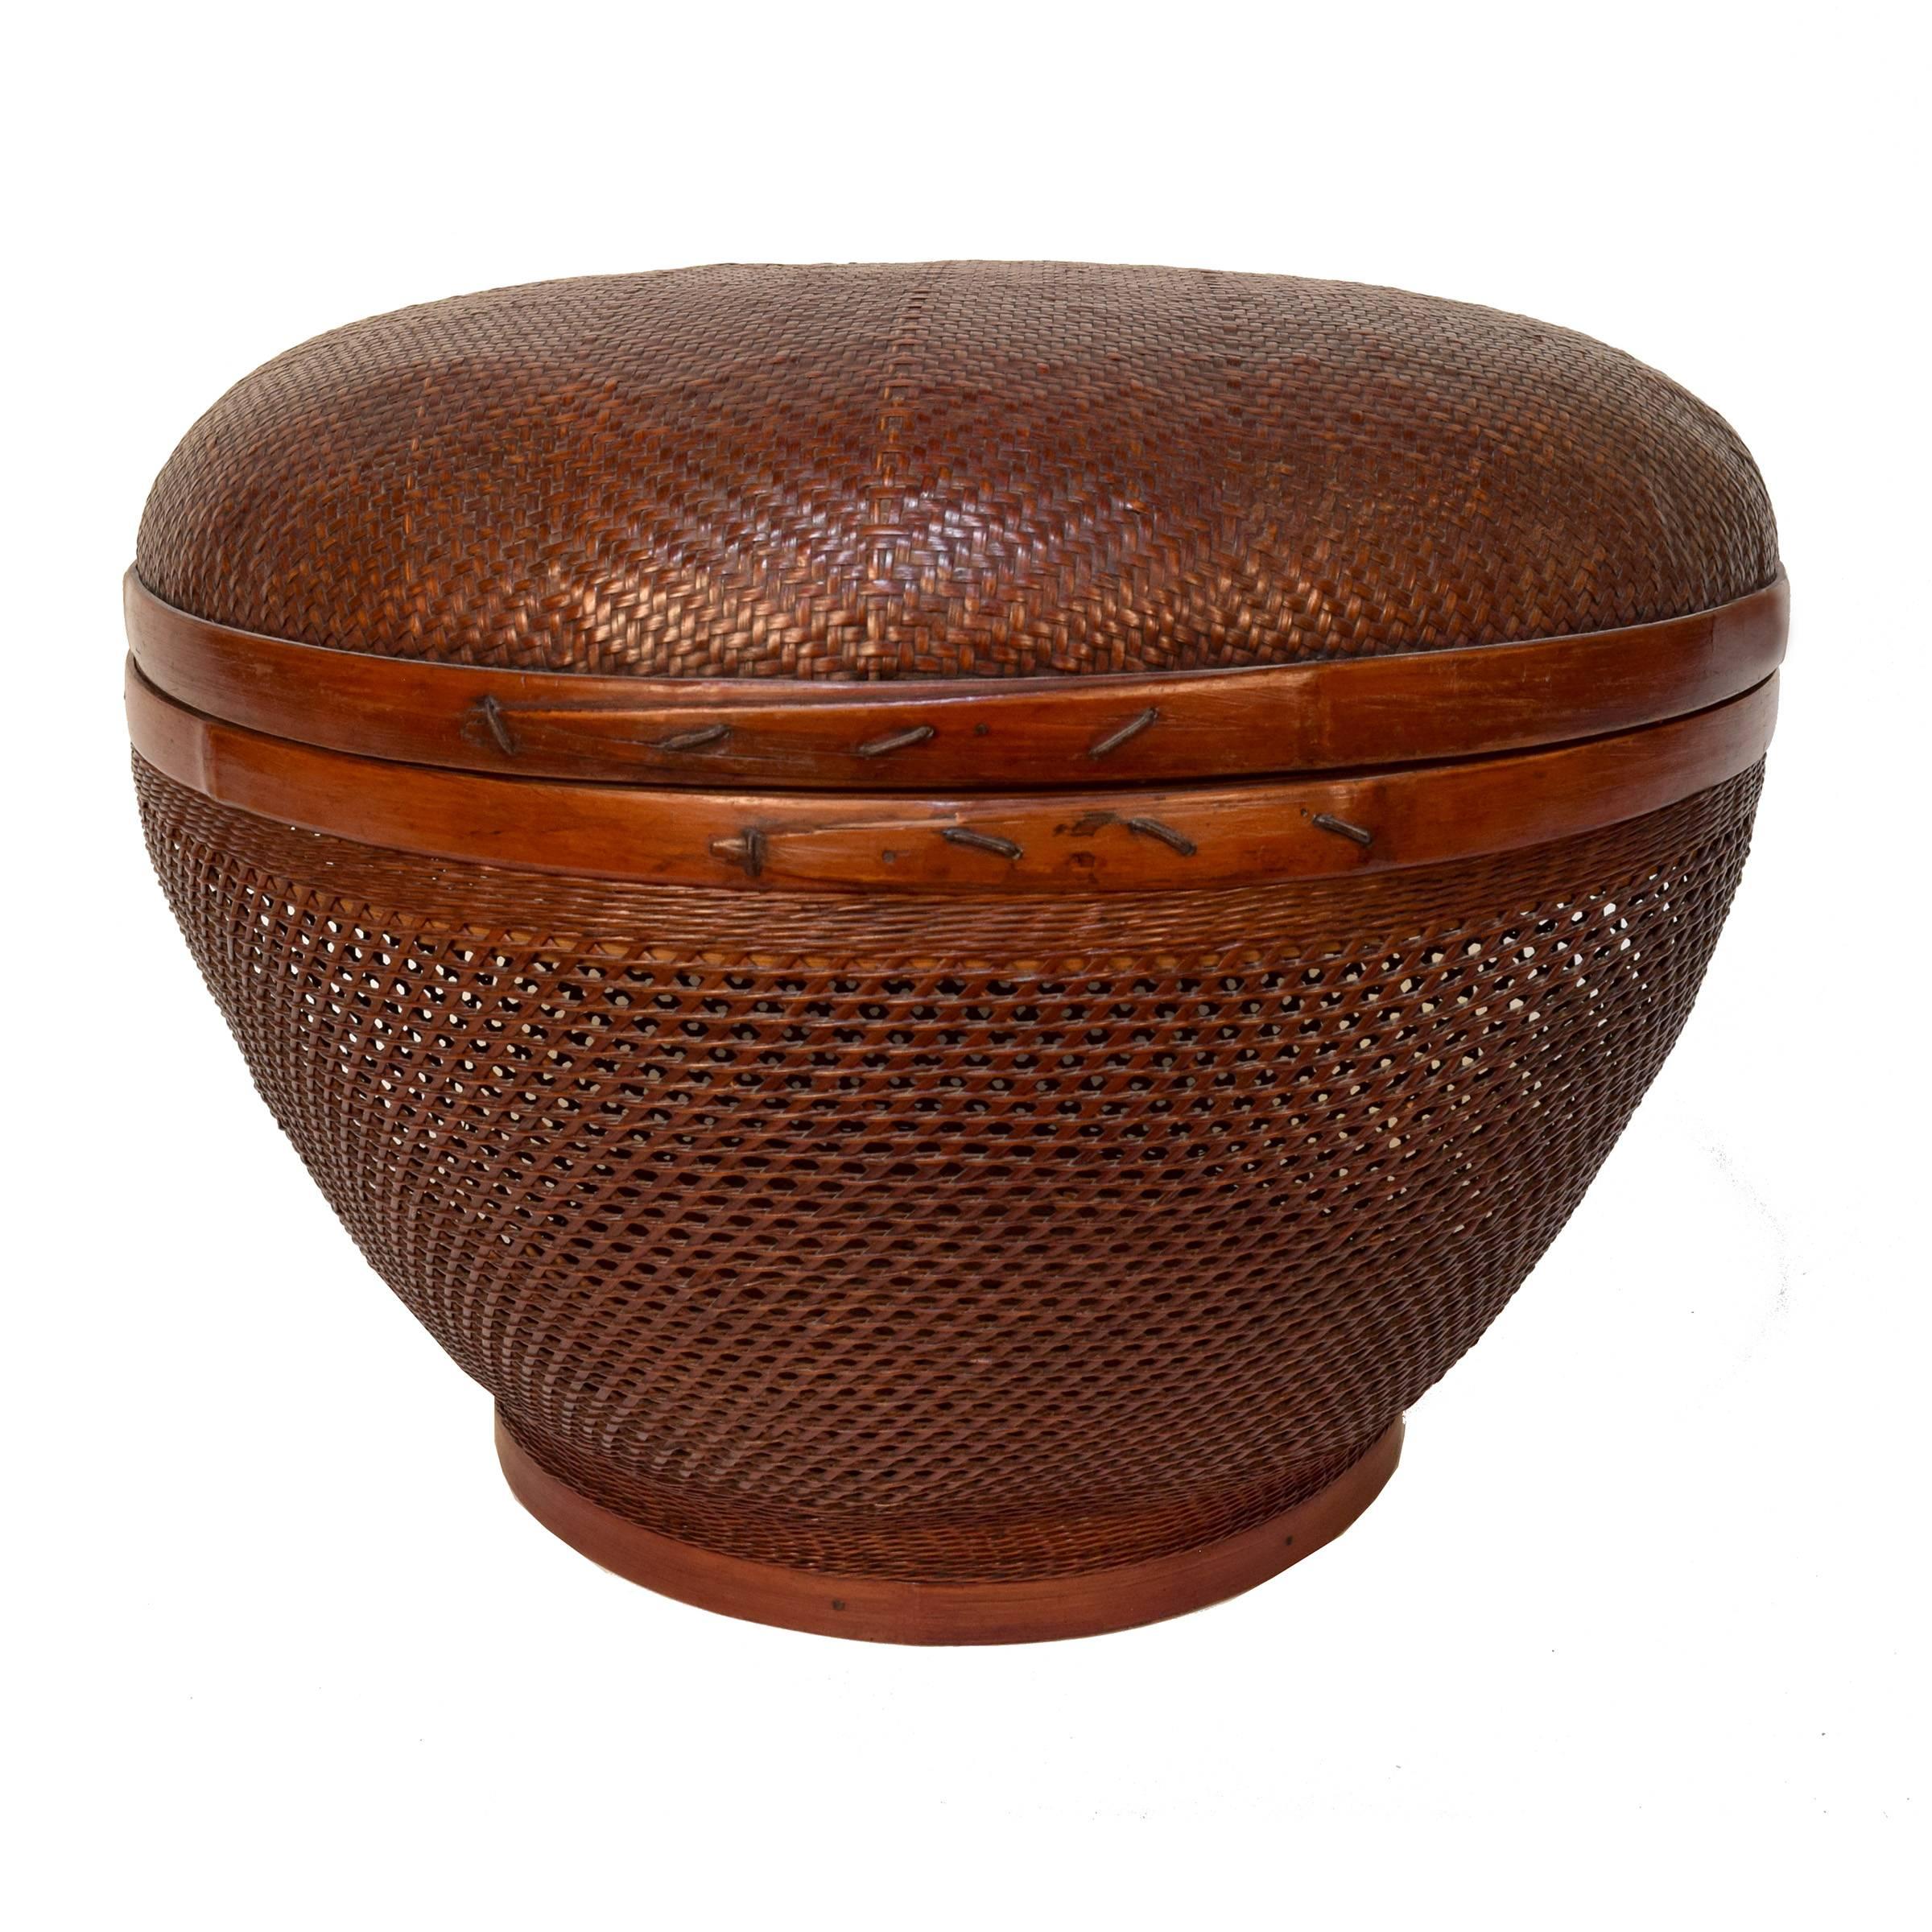 The tightly woven top of this exemplary basket gently deconstructs into the open weave of the bottom. It was likely used to protect fresh produce during the Qing dynasty. The artisan who created it spent many hours cutting, splitting and scraping